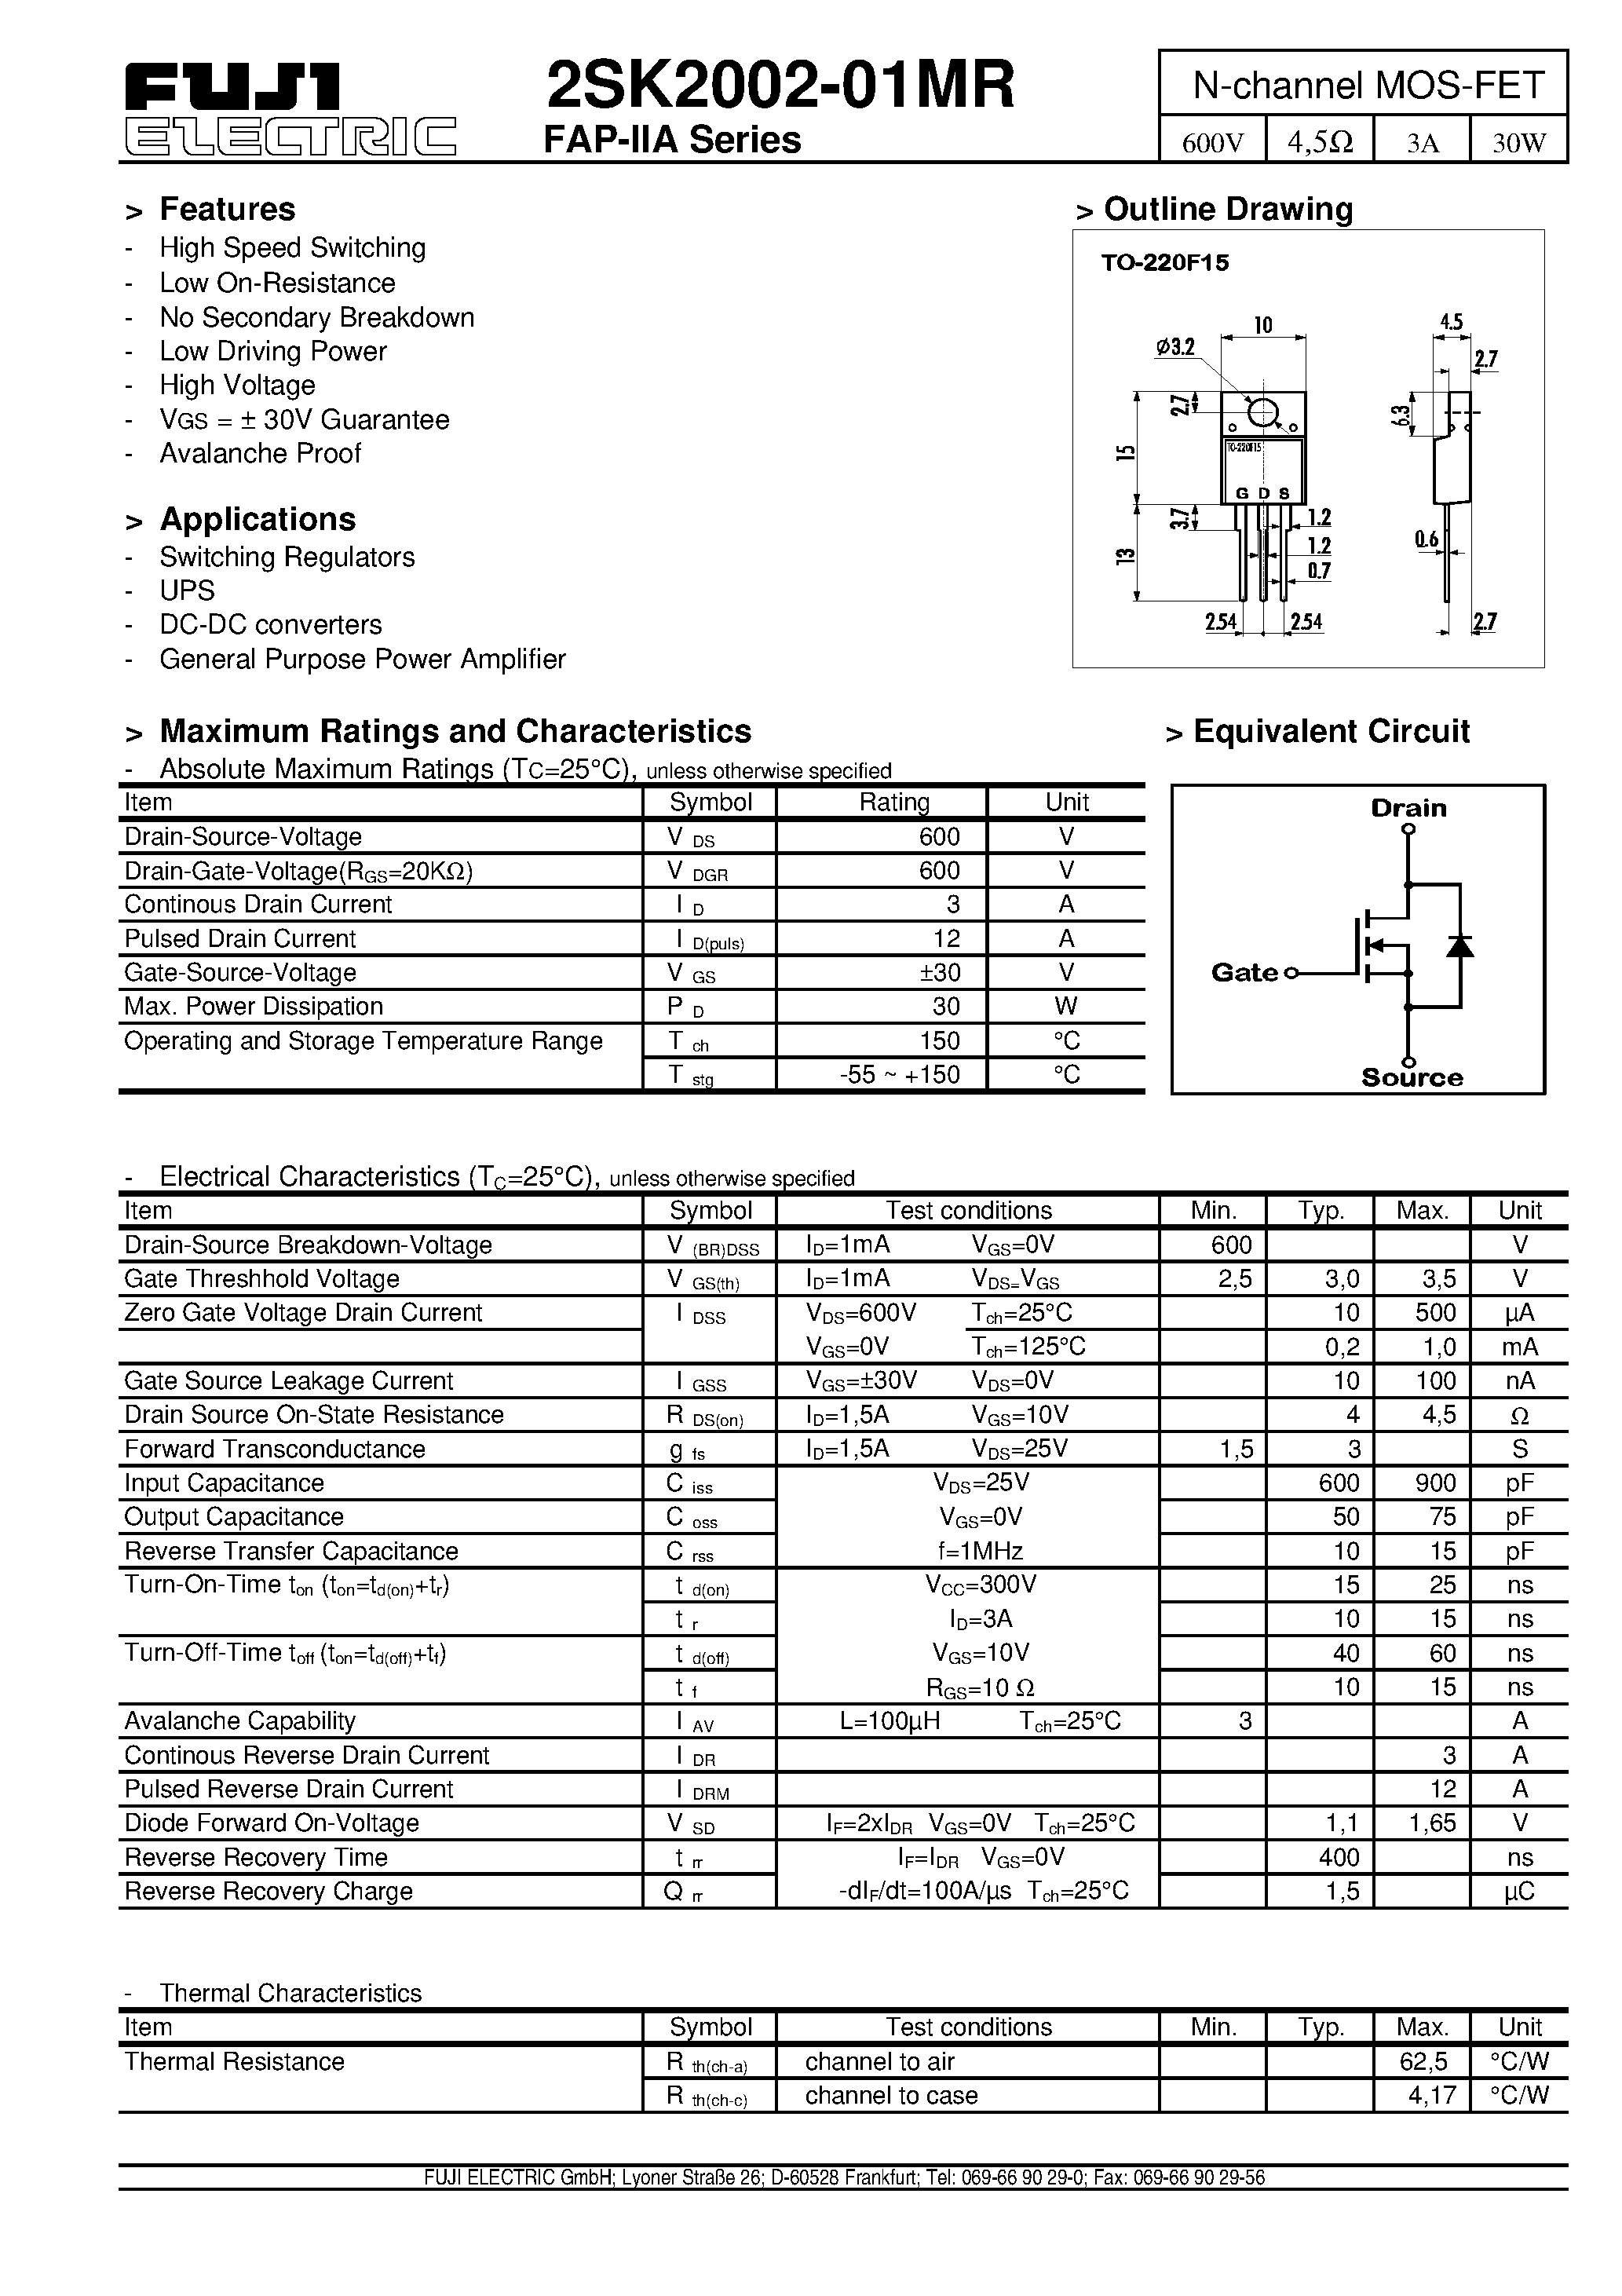 Datasheet 2SK2002-01MR - N-channel MOS-FET page 1